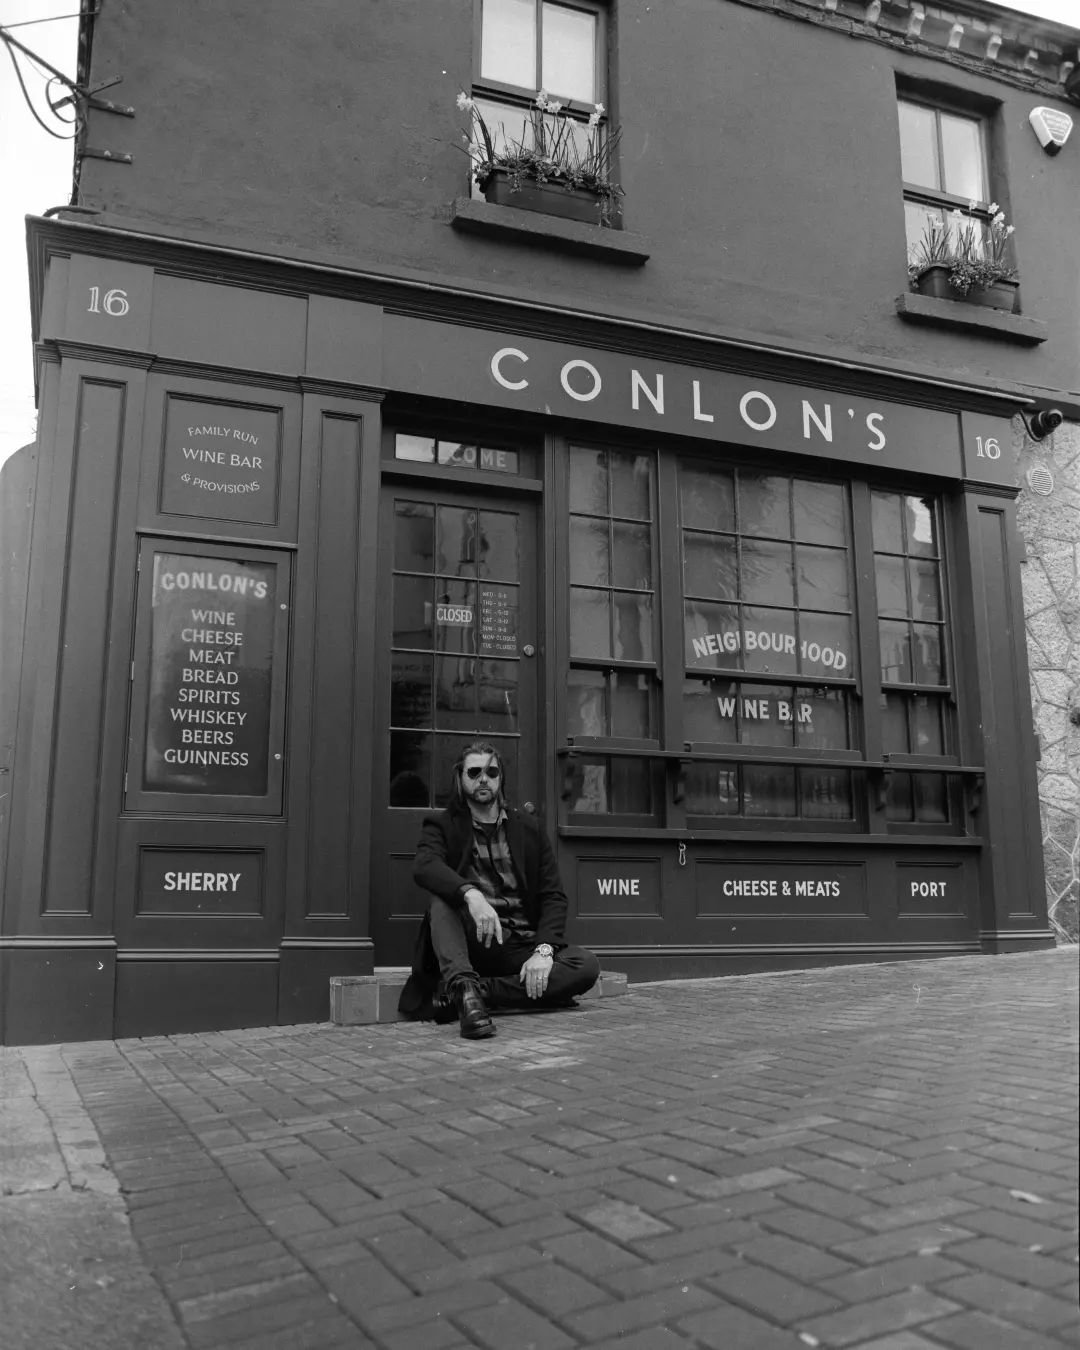 Only a Bon viveur waits for wine bars to open

Some more analogue with the fabulous Carl!

Mamiya RB67//65f4.5

Ilford FP4+ 125@125

Home develop and scan

#filmphotography #paradisaeart #onfilm #filmisnotdead #analogphotography #mediumformat #analog